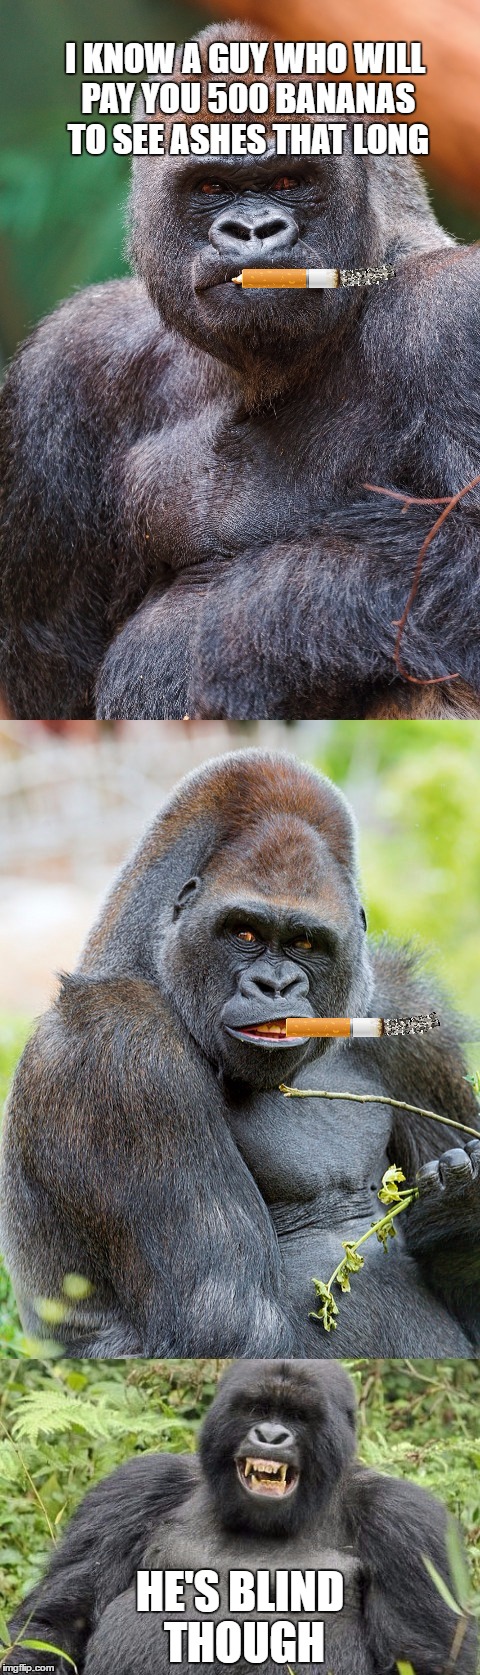 Bad Pun Gorilla | I KNOW A GUY WHO WILL PAY YOU 500 BANANAS TO SEE ASHES THAT LONG; HE'S BLIND THOUGH | image tagged in bad pun gorilla,lynch1979,memes,lol | made w/ Imgflip meme maker